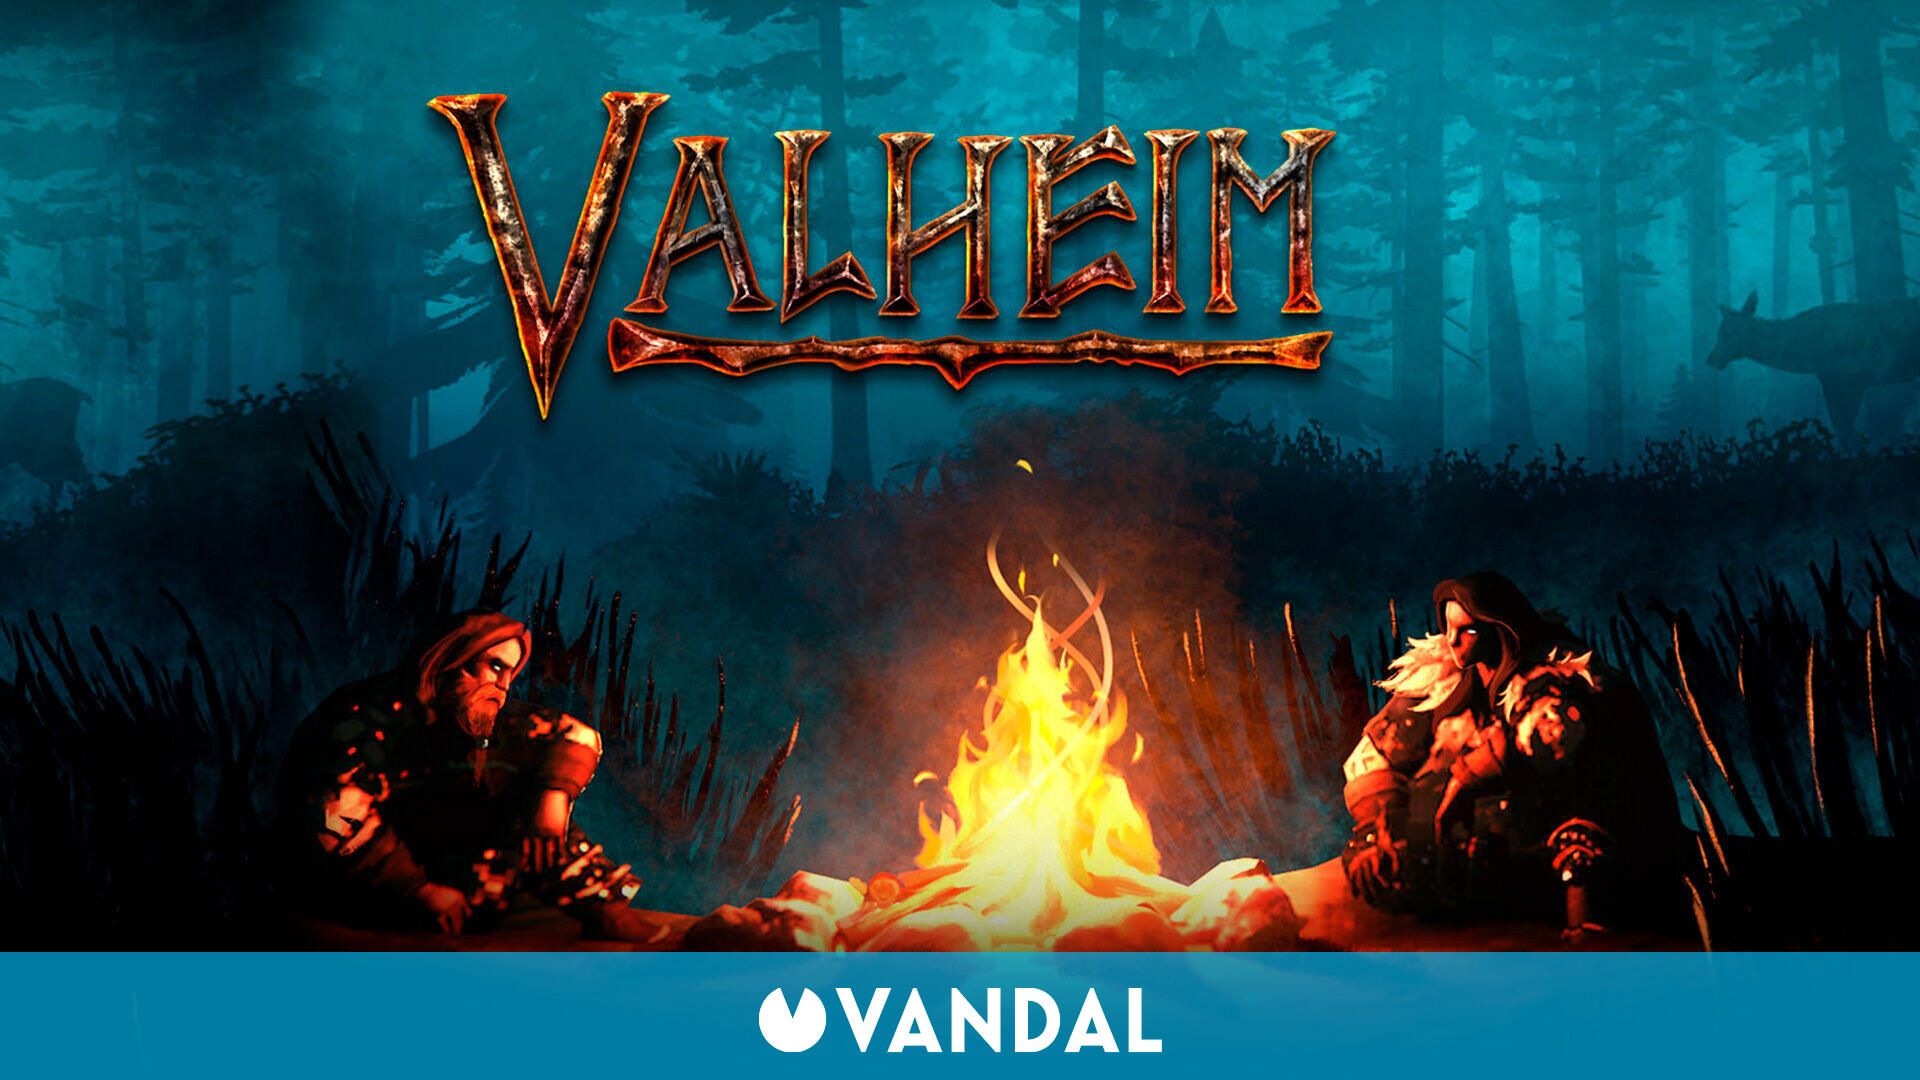 Valheim is an Xbox exclusive on consoles at least 6 months old